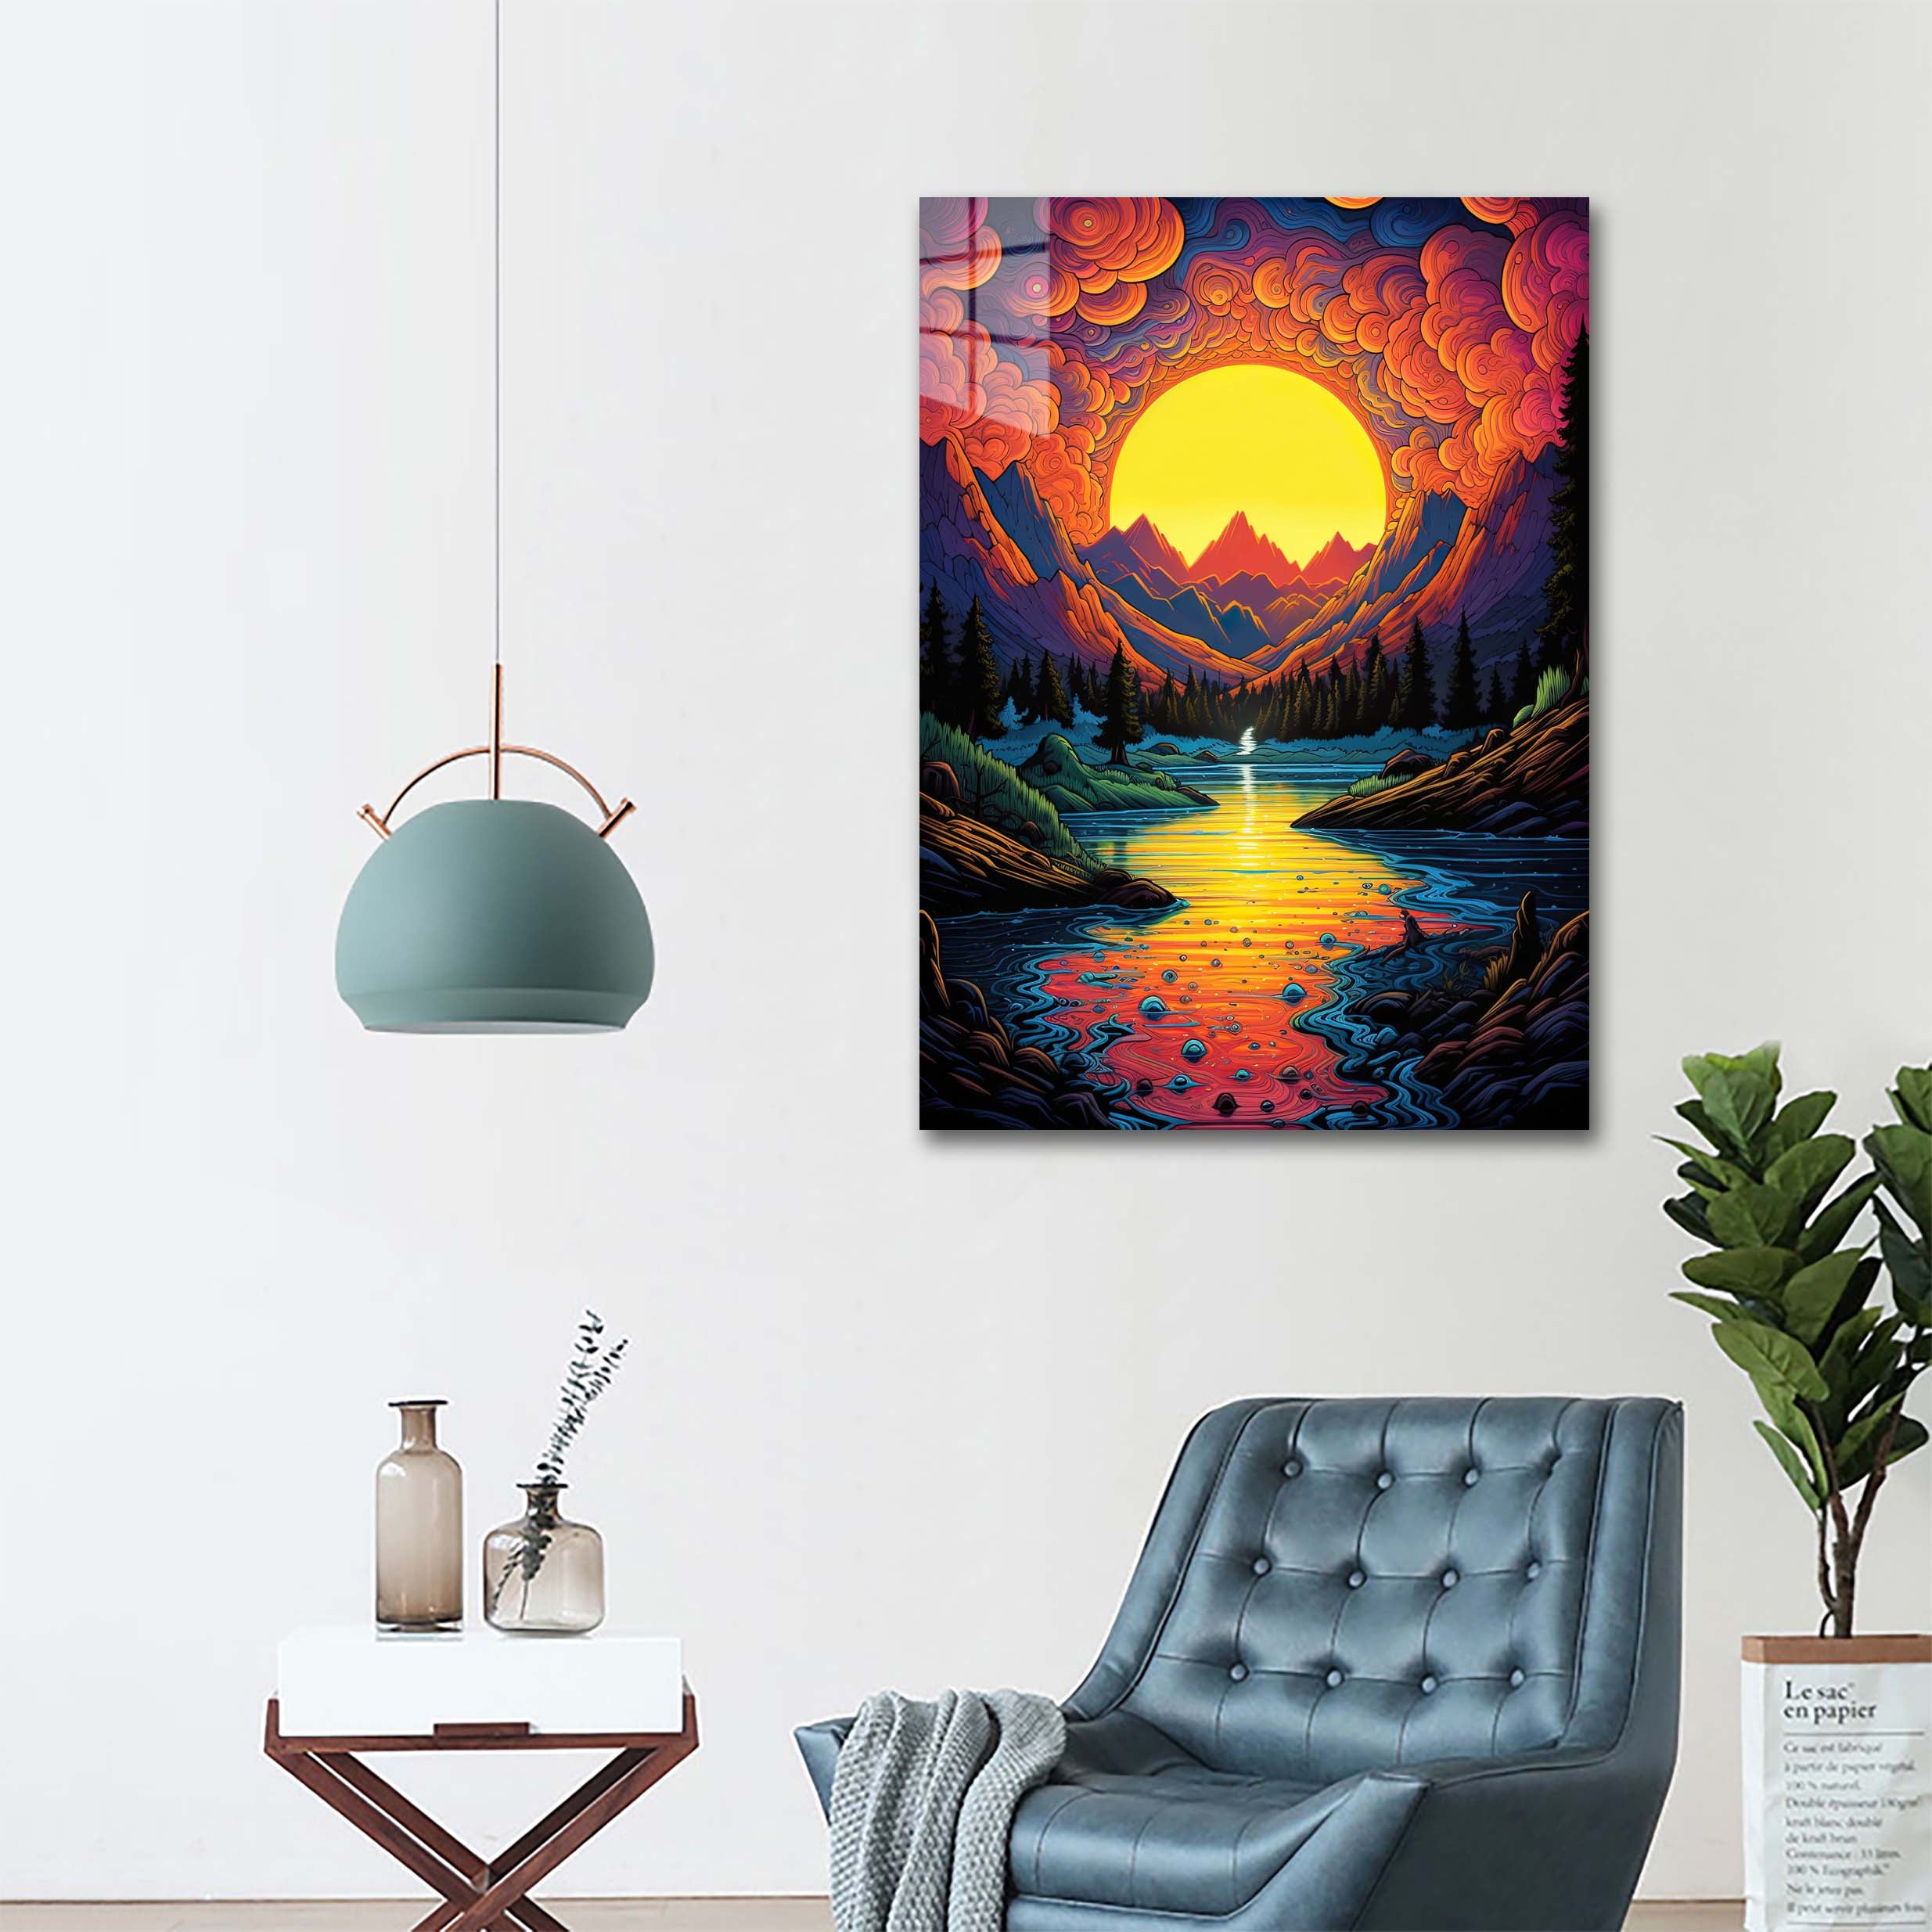 Sunlit Peaks_ Psychedelic Reflections and Mythic Symbolism-designed by @Da vinci Ai Art